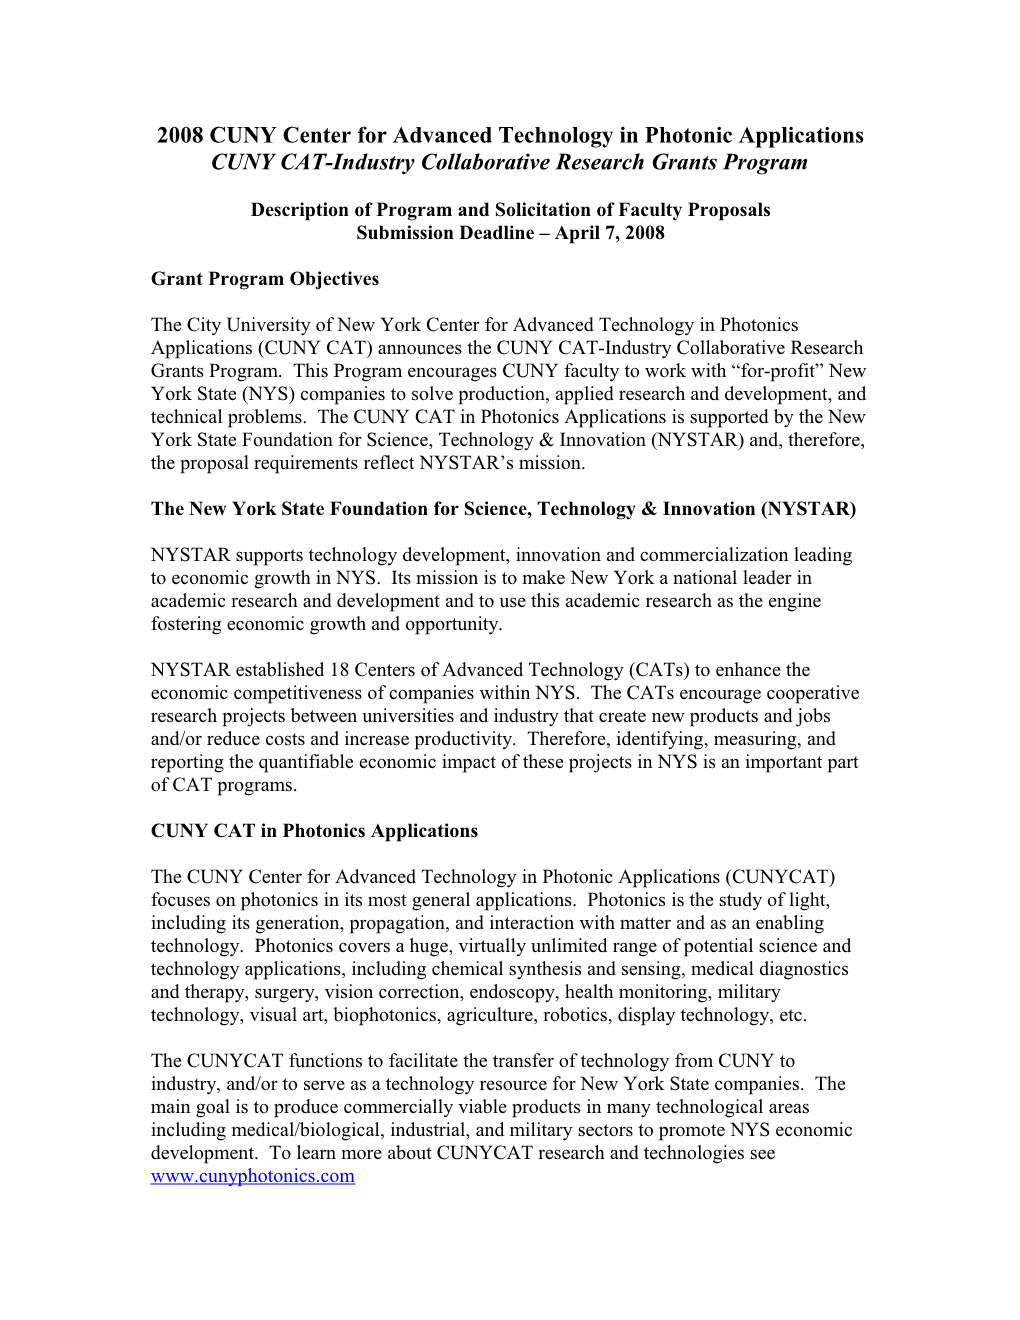 CUNY Center for Advanced Technology (CUNYCAT)